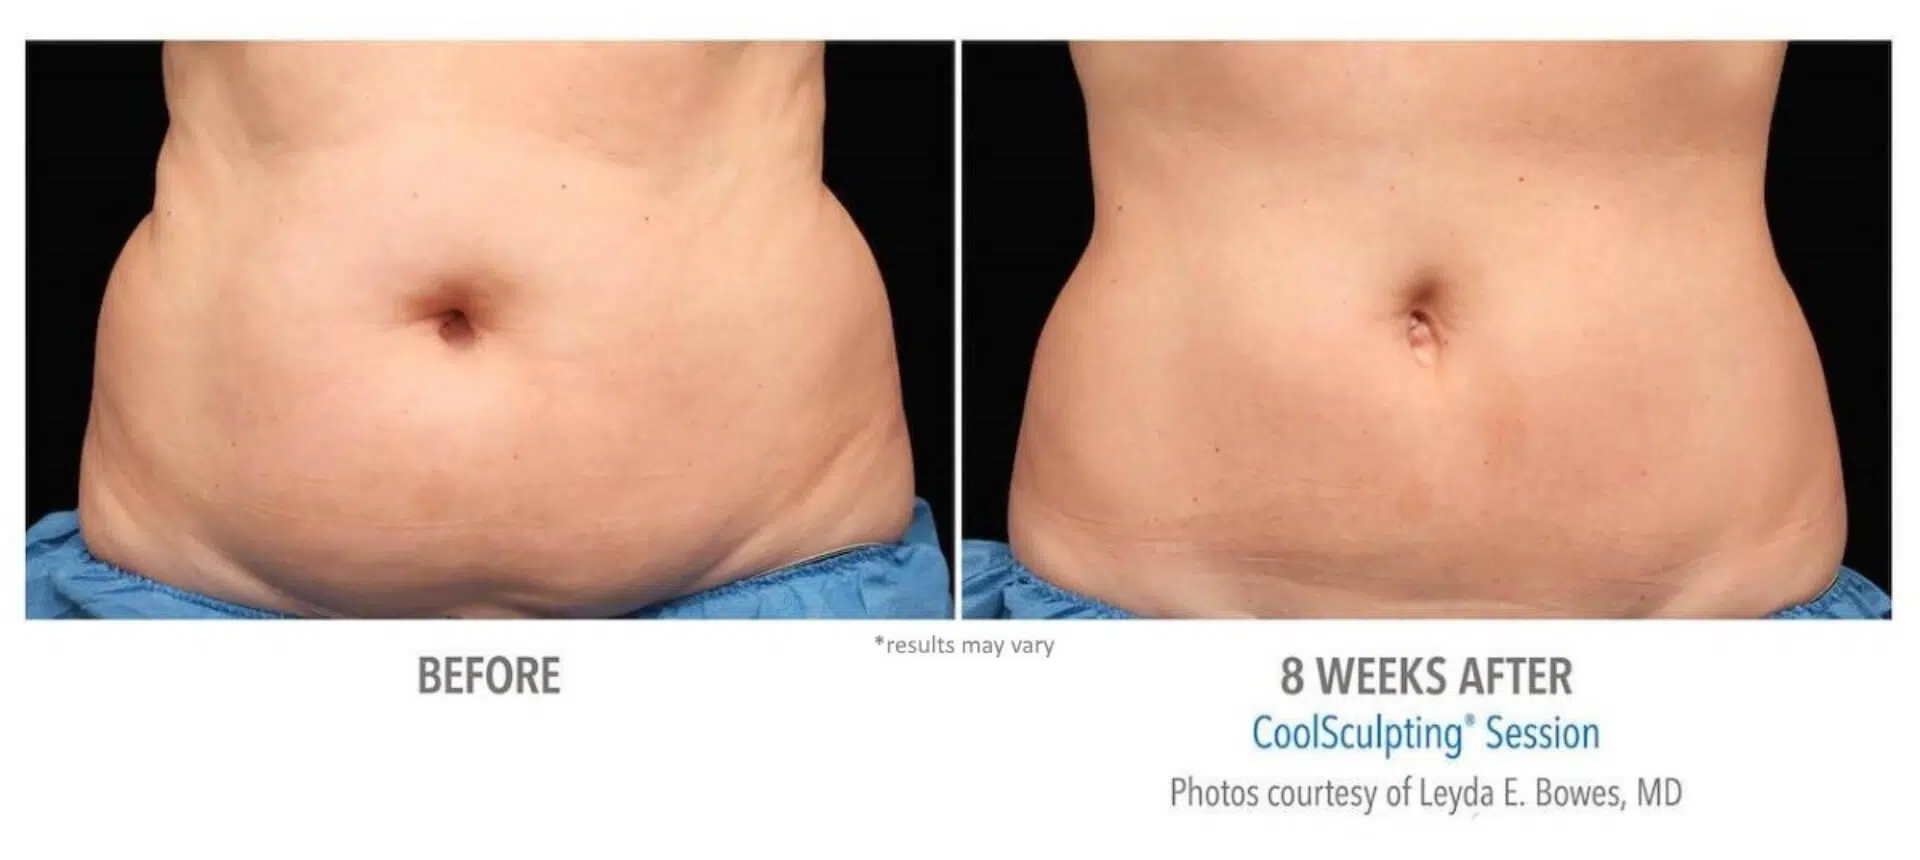 Body Sculpting - Coolsculpting Treatment for Fat Freeze & Body Contouring